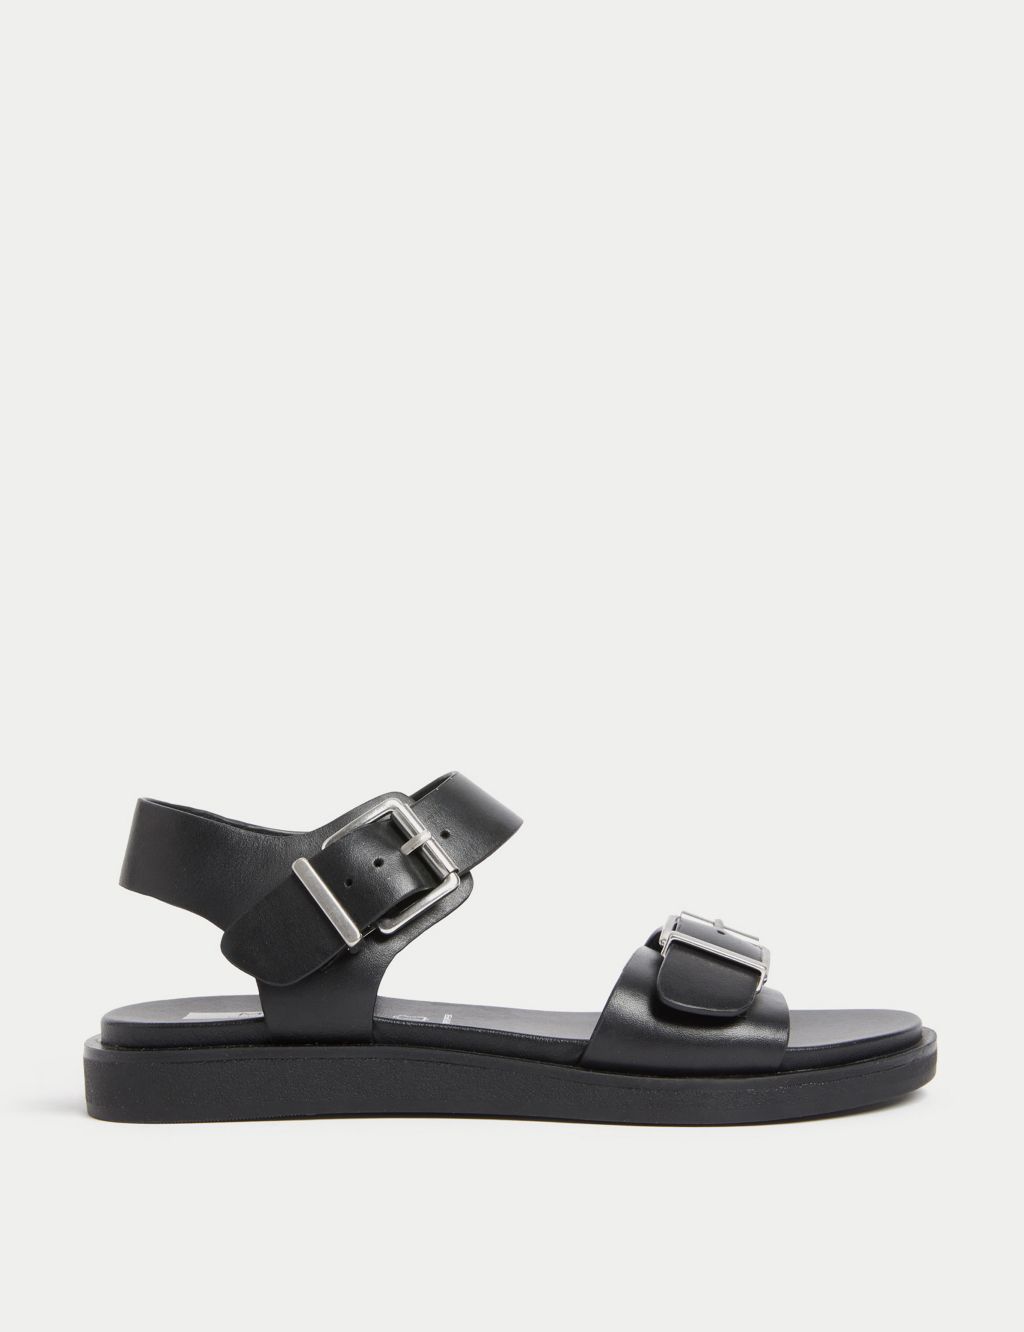 Leather Buckle Flat Sandals Mid image 1